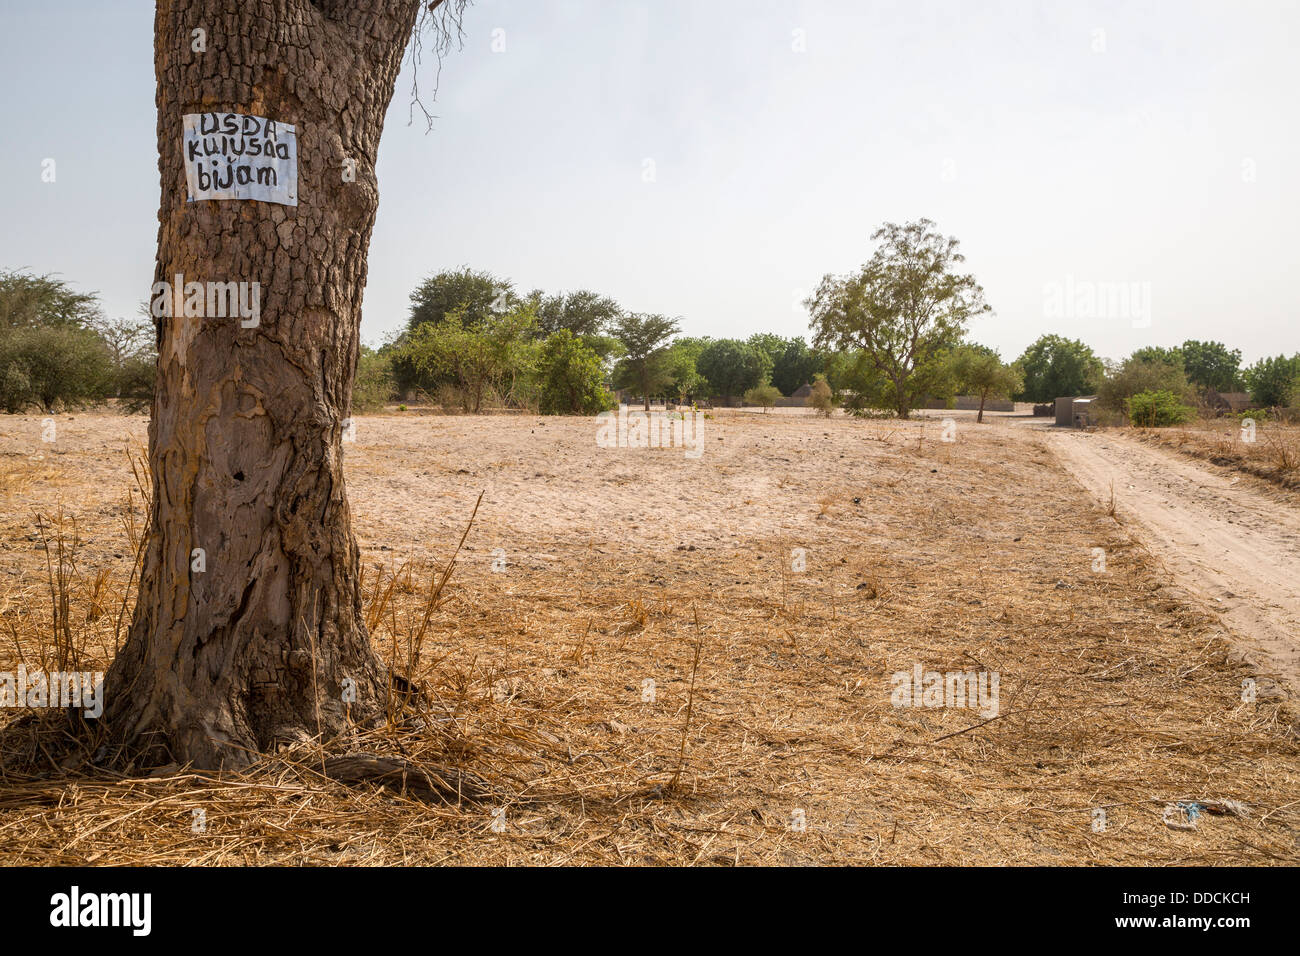 Sign on Tree Indicates that the Village, Bijam, near Kaolack, Senegal, is participating in a Millet Development Program. Stock Photo